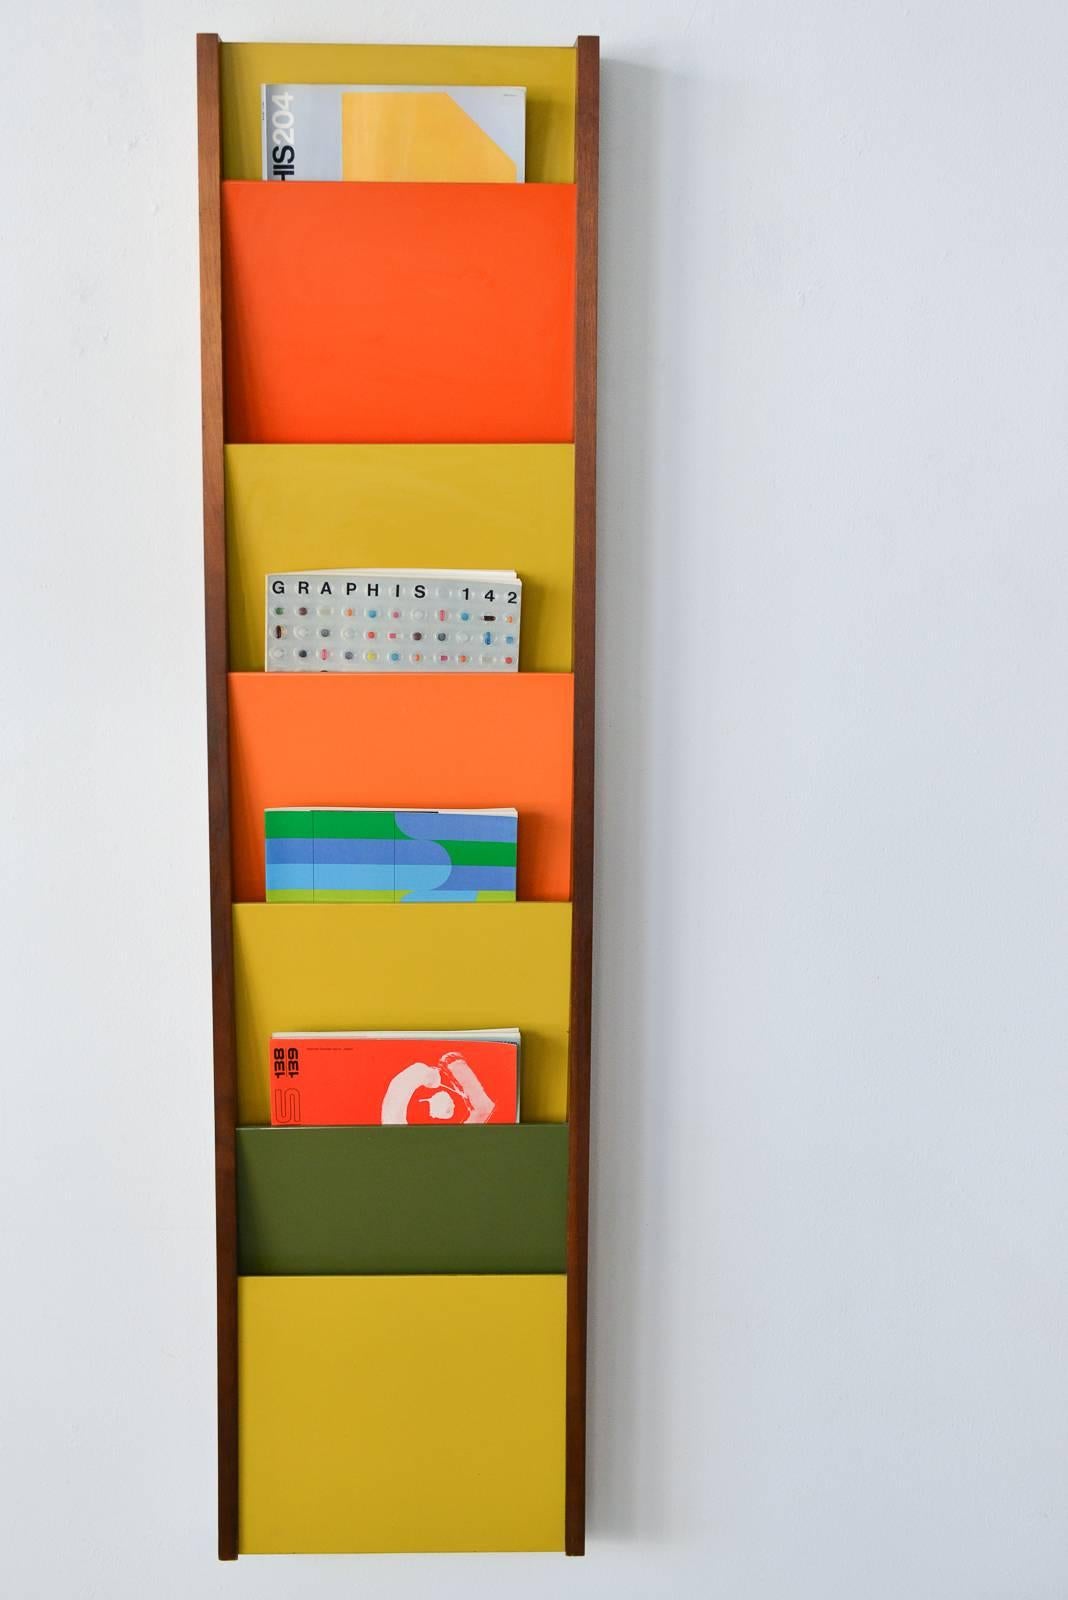 Rare multi-colored wall-mounted magazine rack/holder by Peter Pepper Products of Wilmington, CA, circa 1970. Excellent vintage condition, walnut frame with laminate dividers in orange, green and mustard. Measures: 57